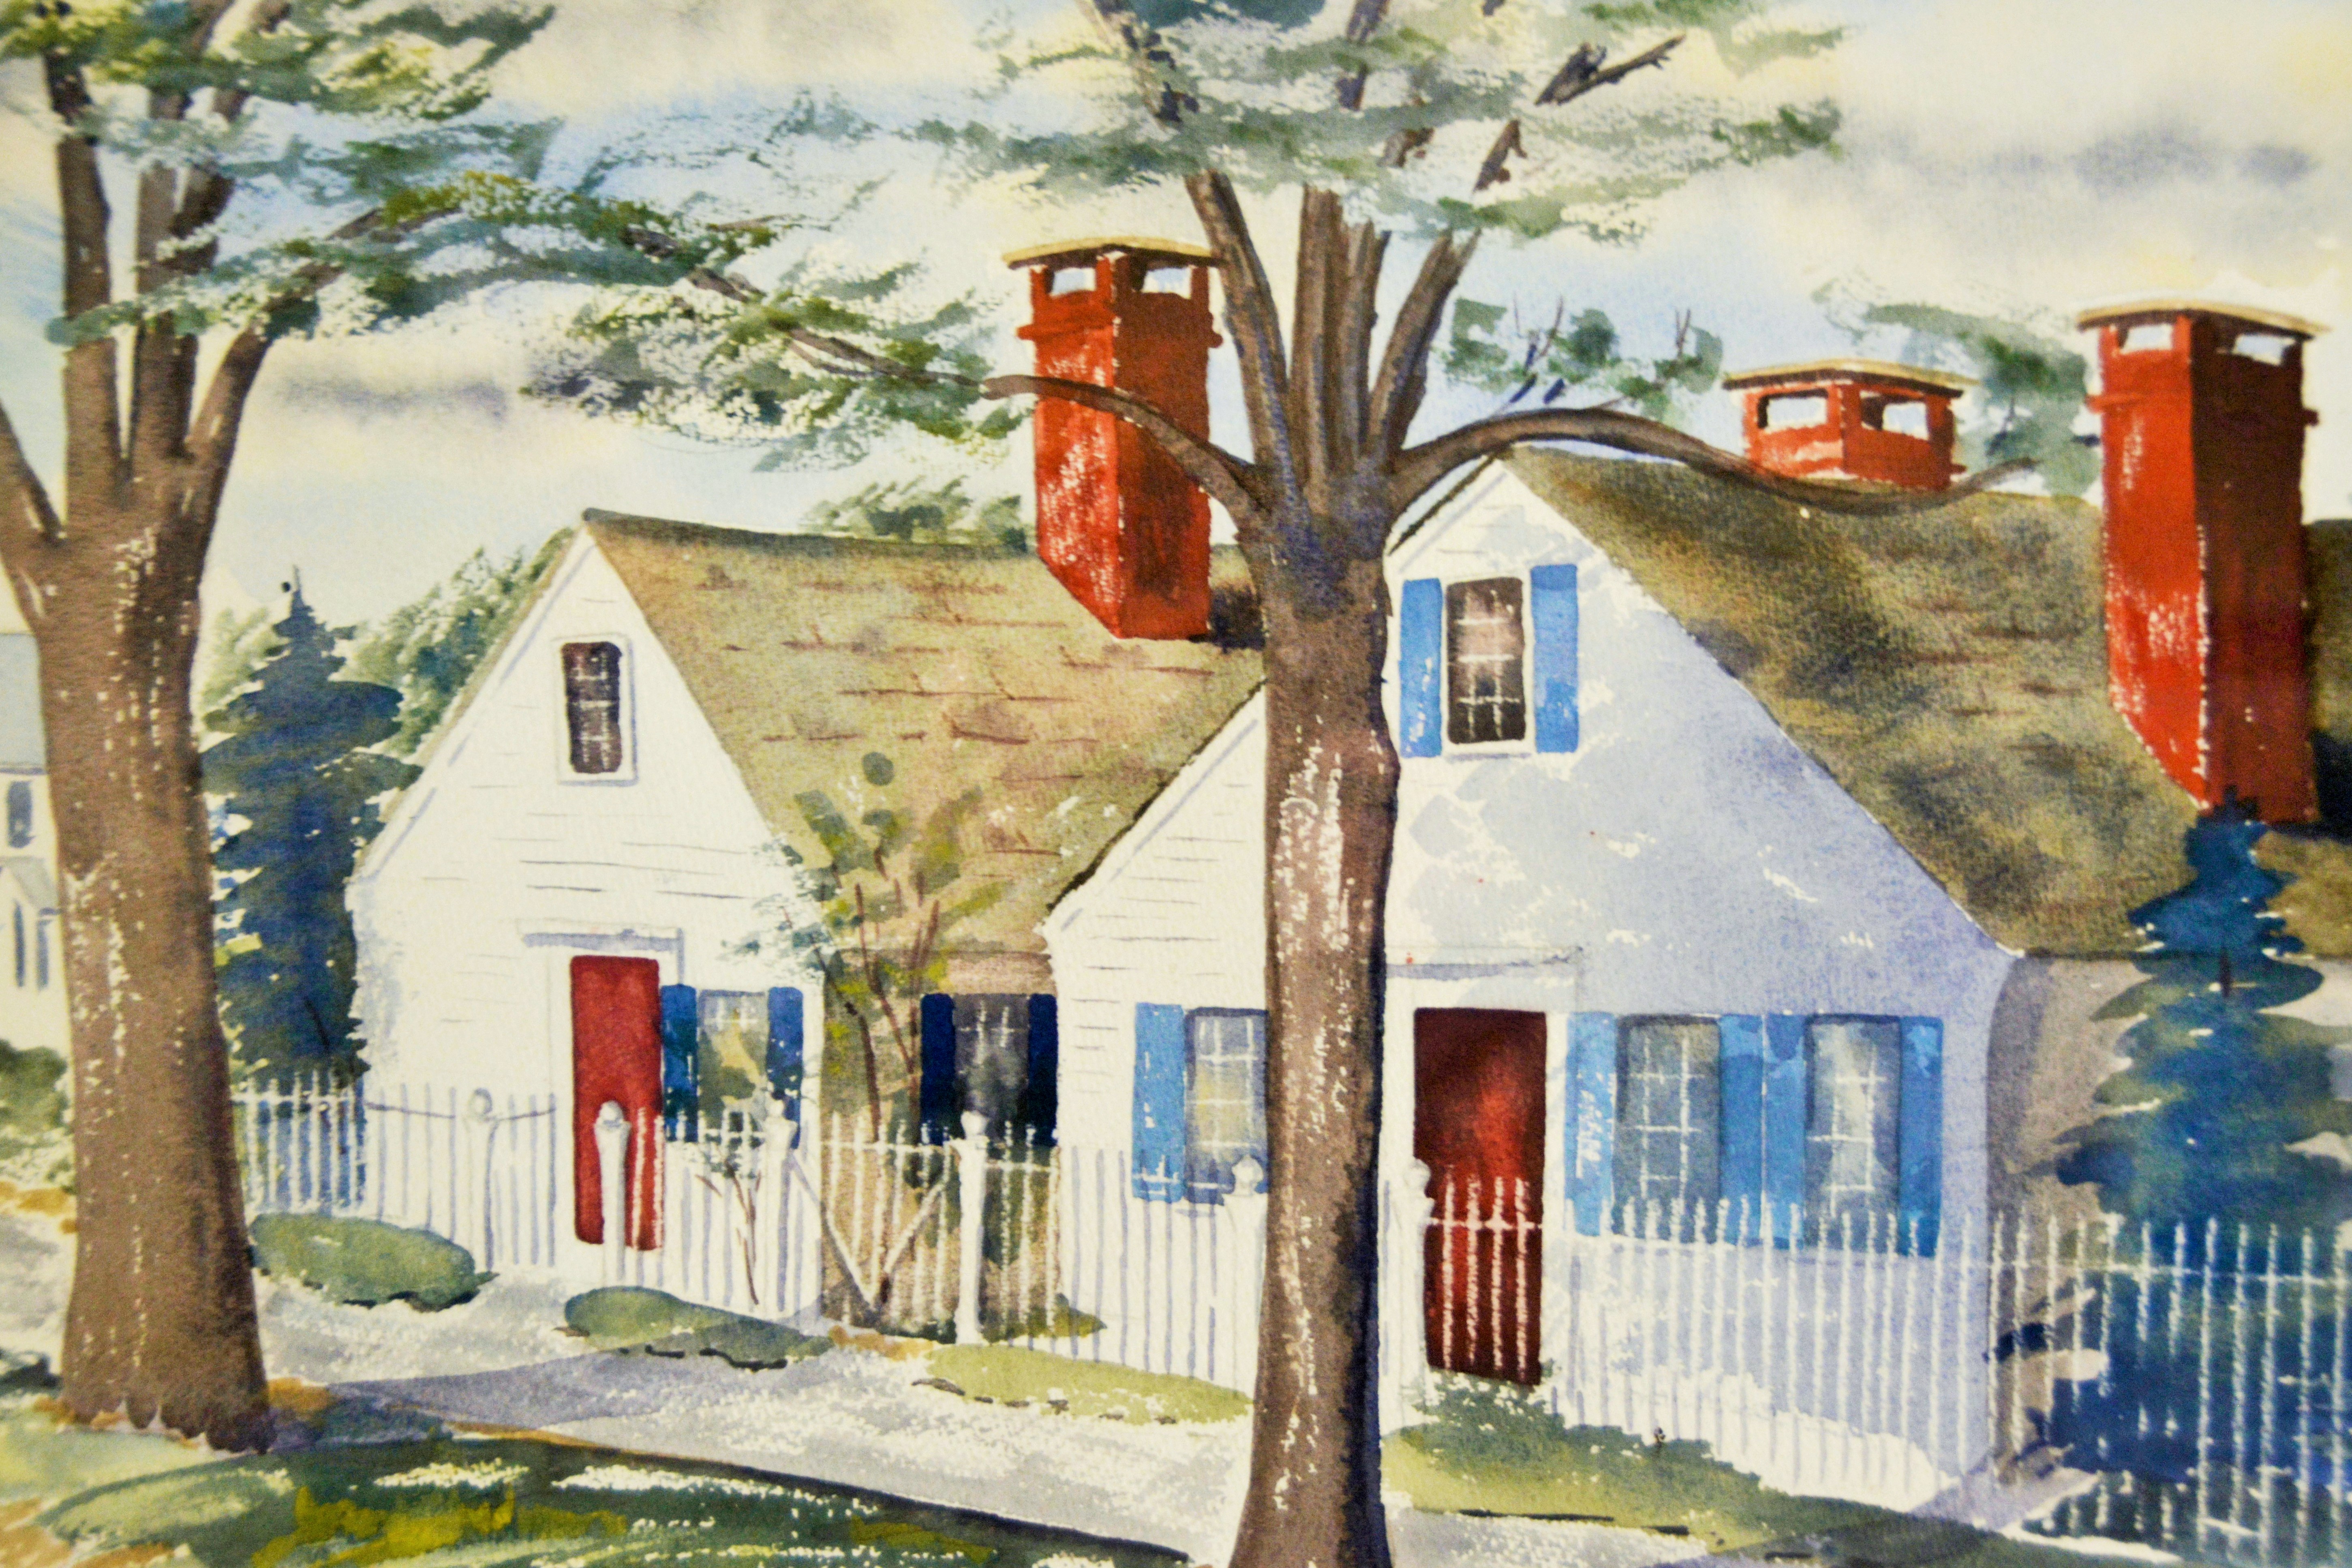 “The Cottages”